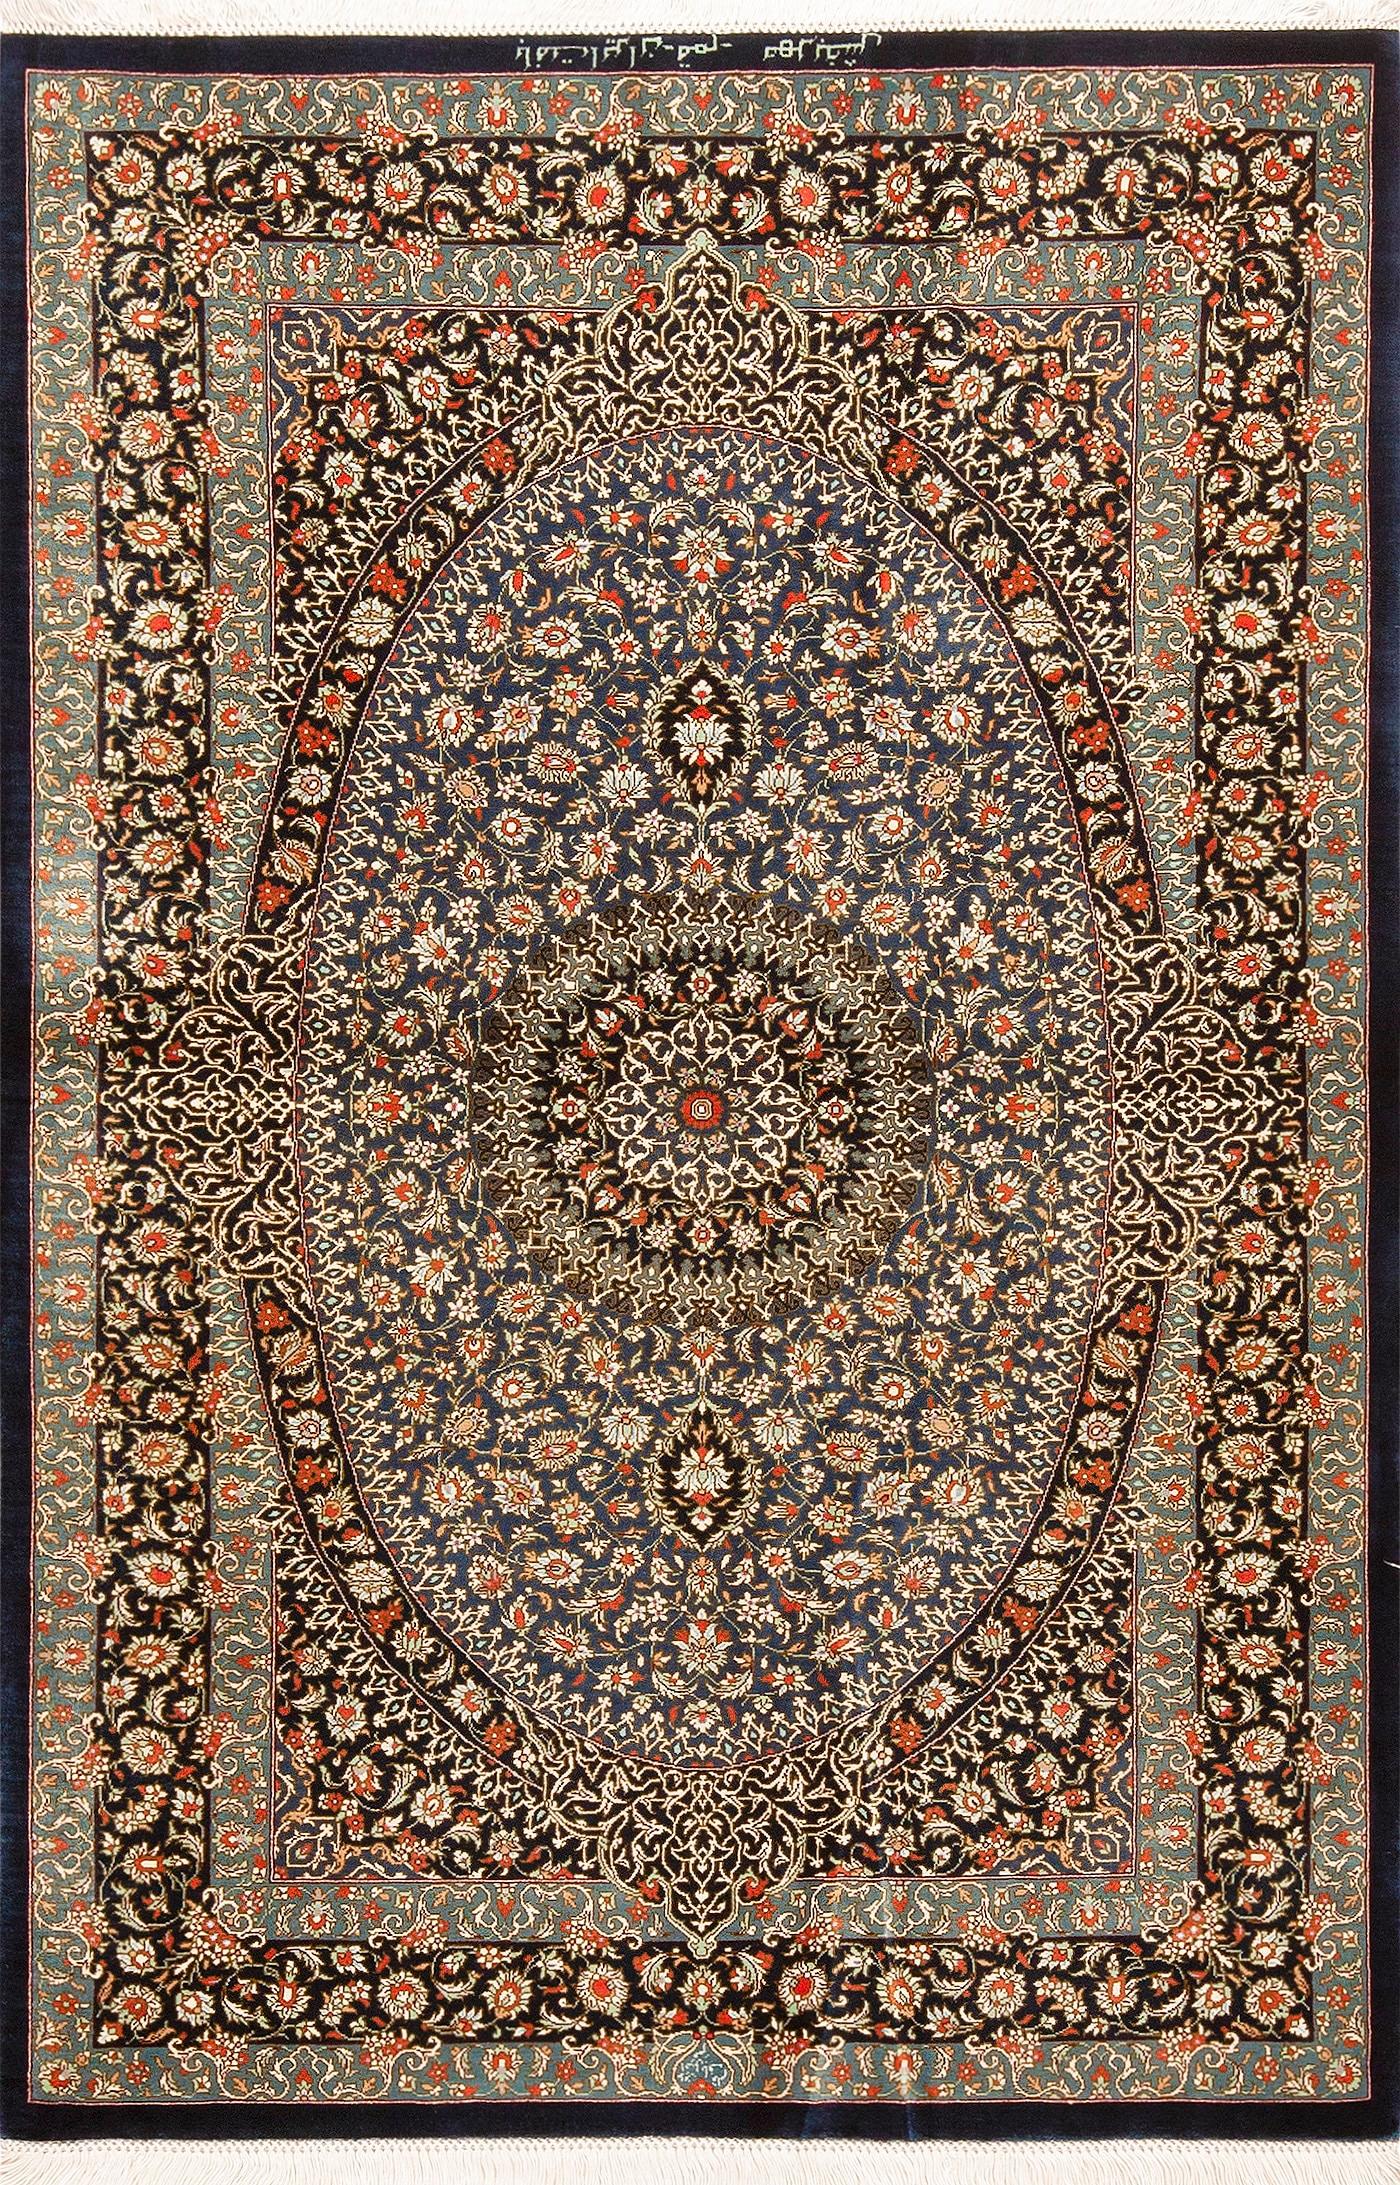 Fine Luxurious Small Scatter Size Vintage Silk Persian Qum Rug, country of origin: Persian Rugs, Circa date: Vintage